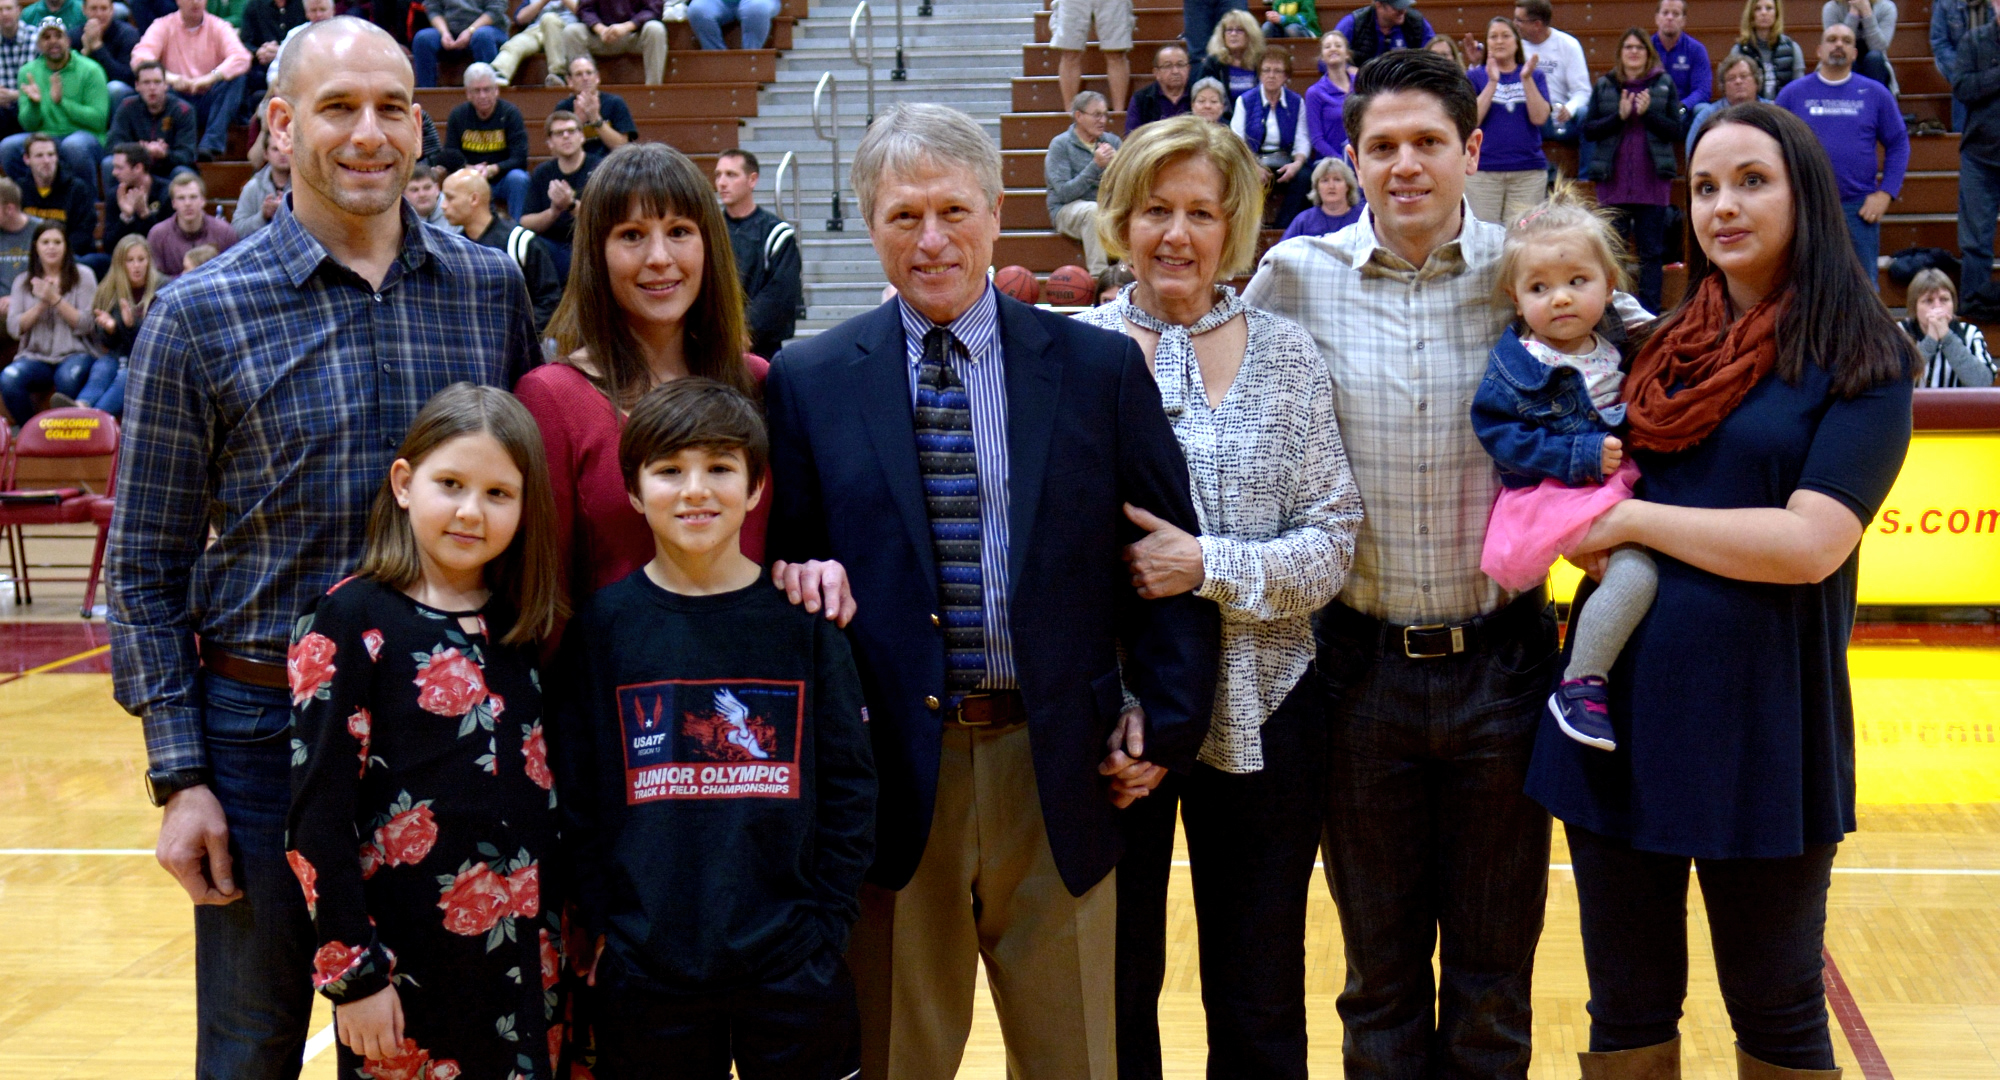 Concordia head coach Rich Glas is surrounded by his wife, kids and grandkids before the final game of his legendary 37-year career.